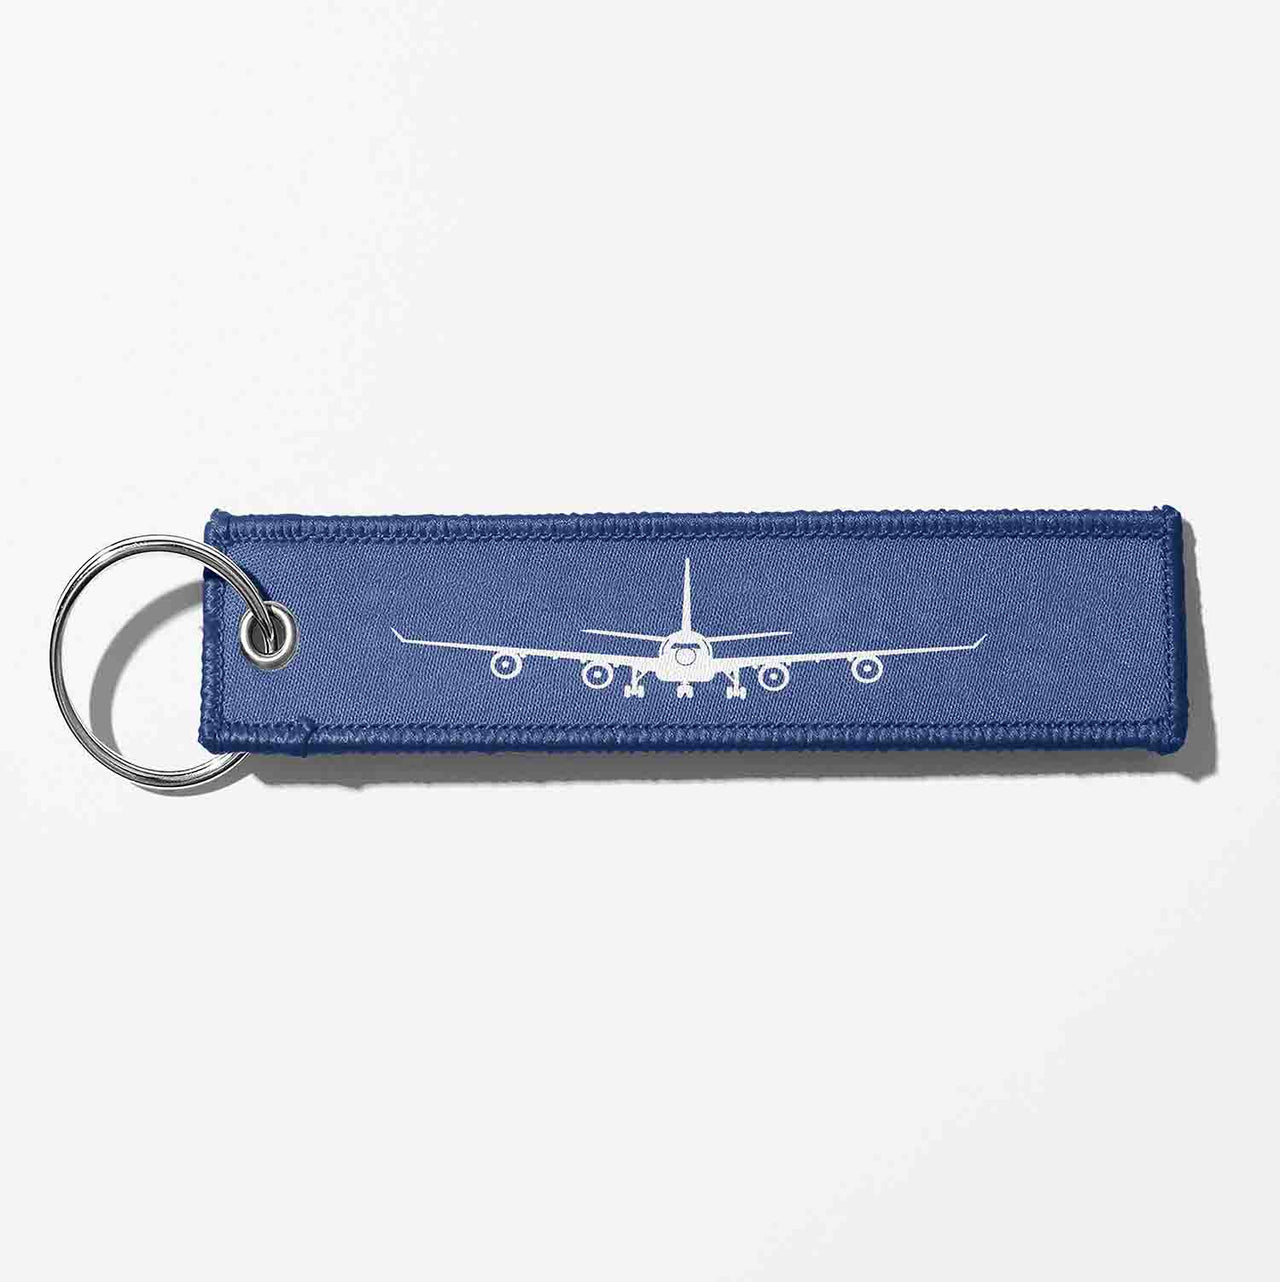 Airbus A340 Silhouette Designed Key Chains